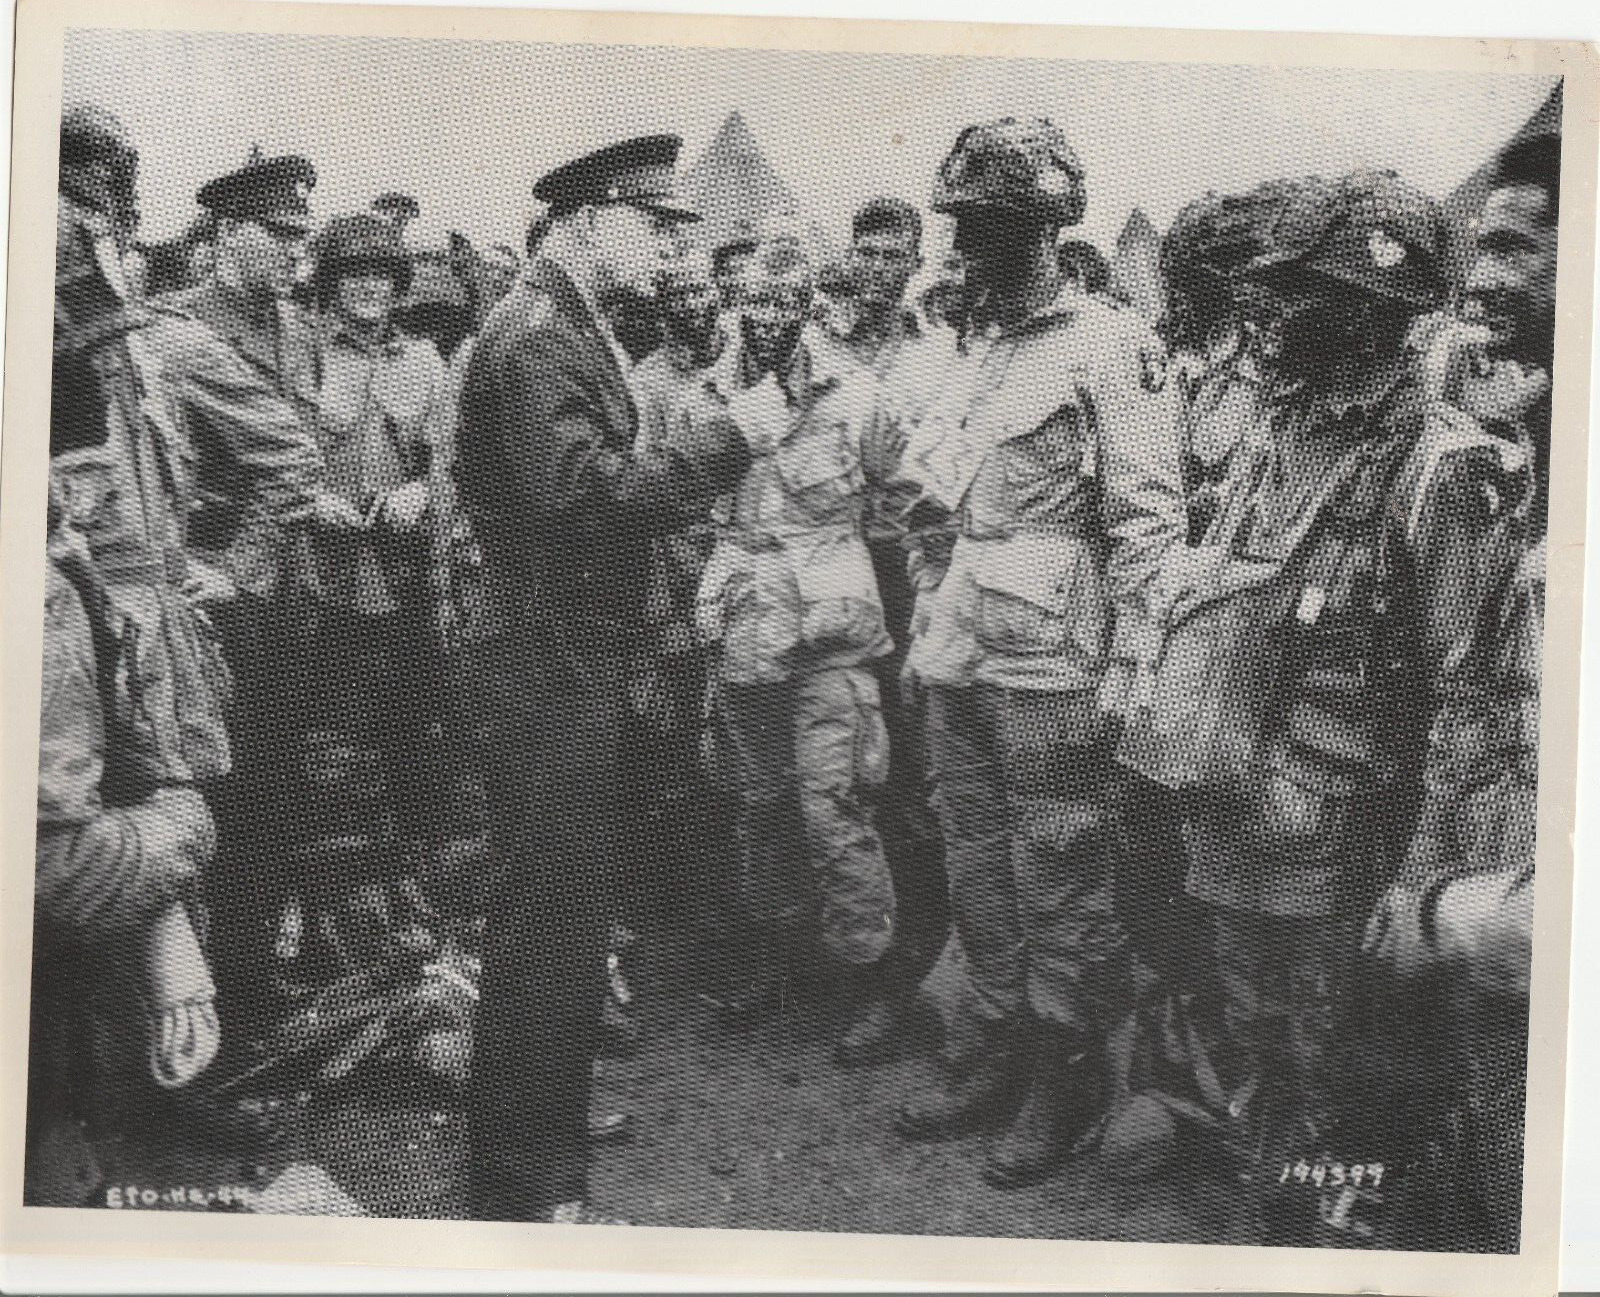 General Dwight D Eisenhower Addressing the D-Day Troops WWII Veterans Committee